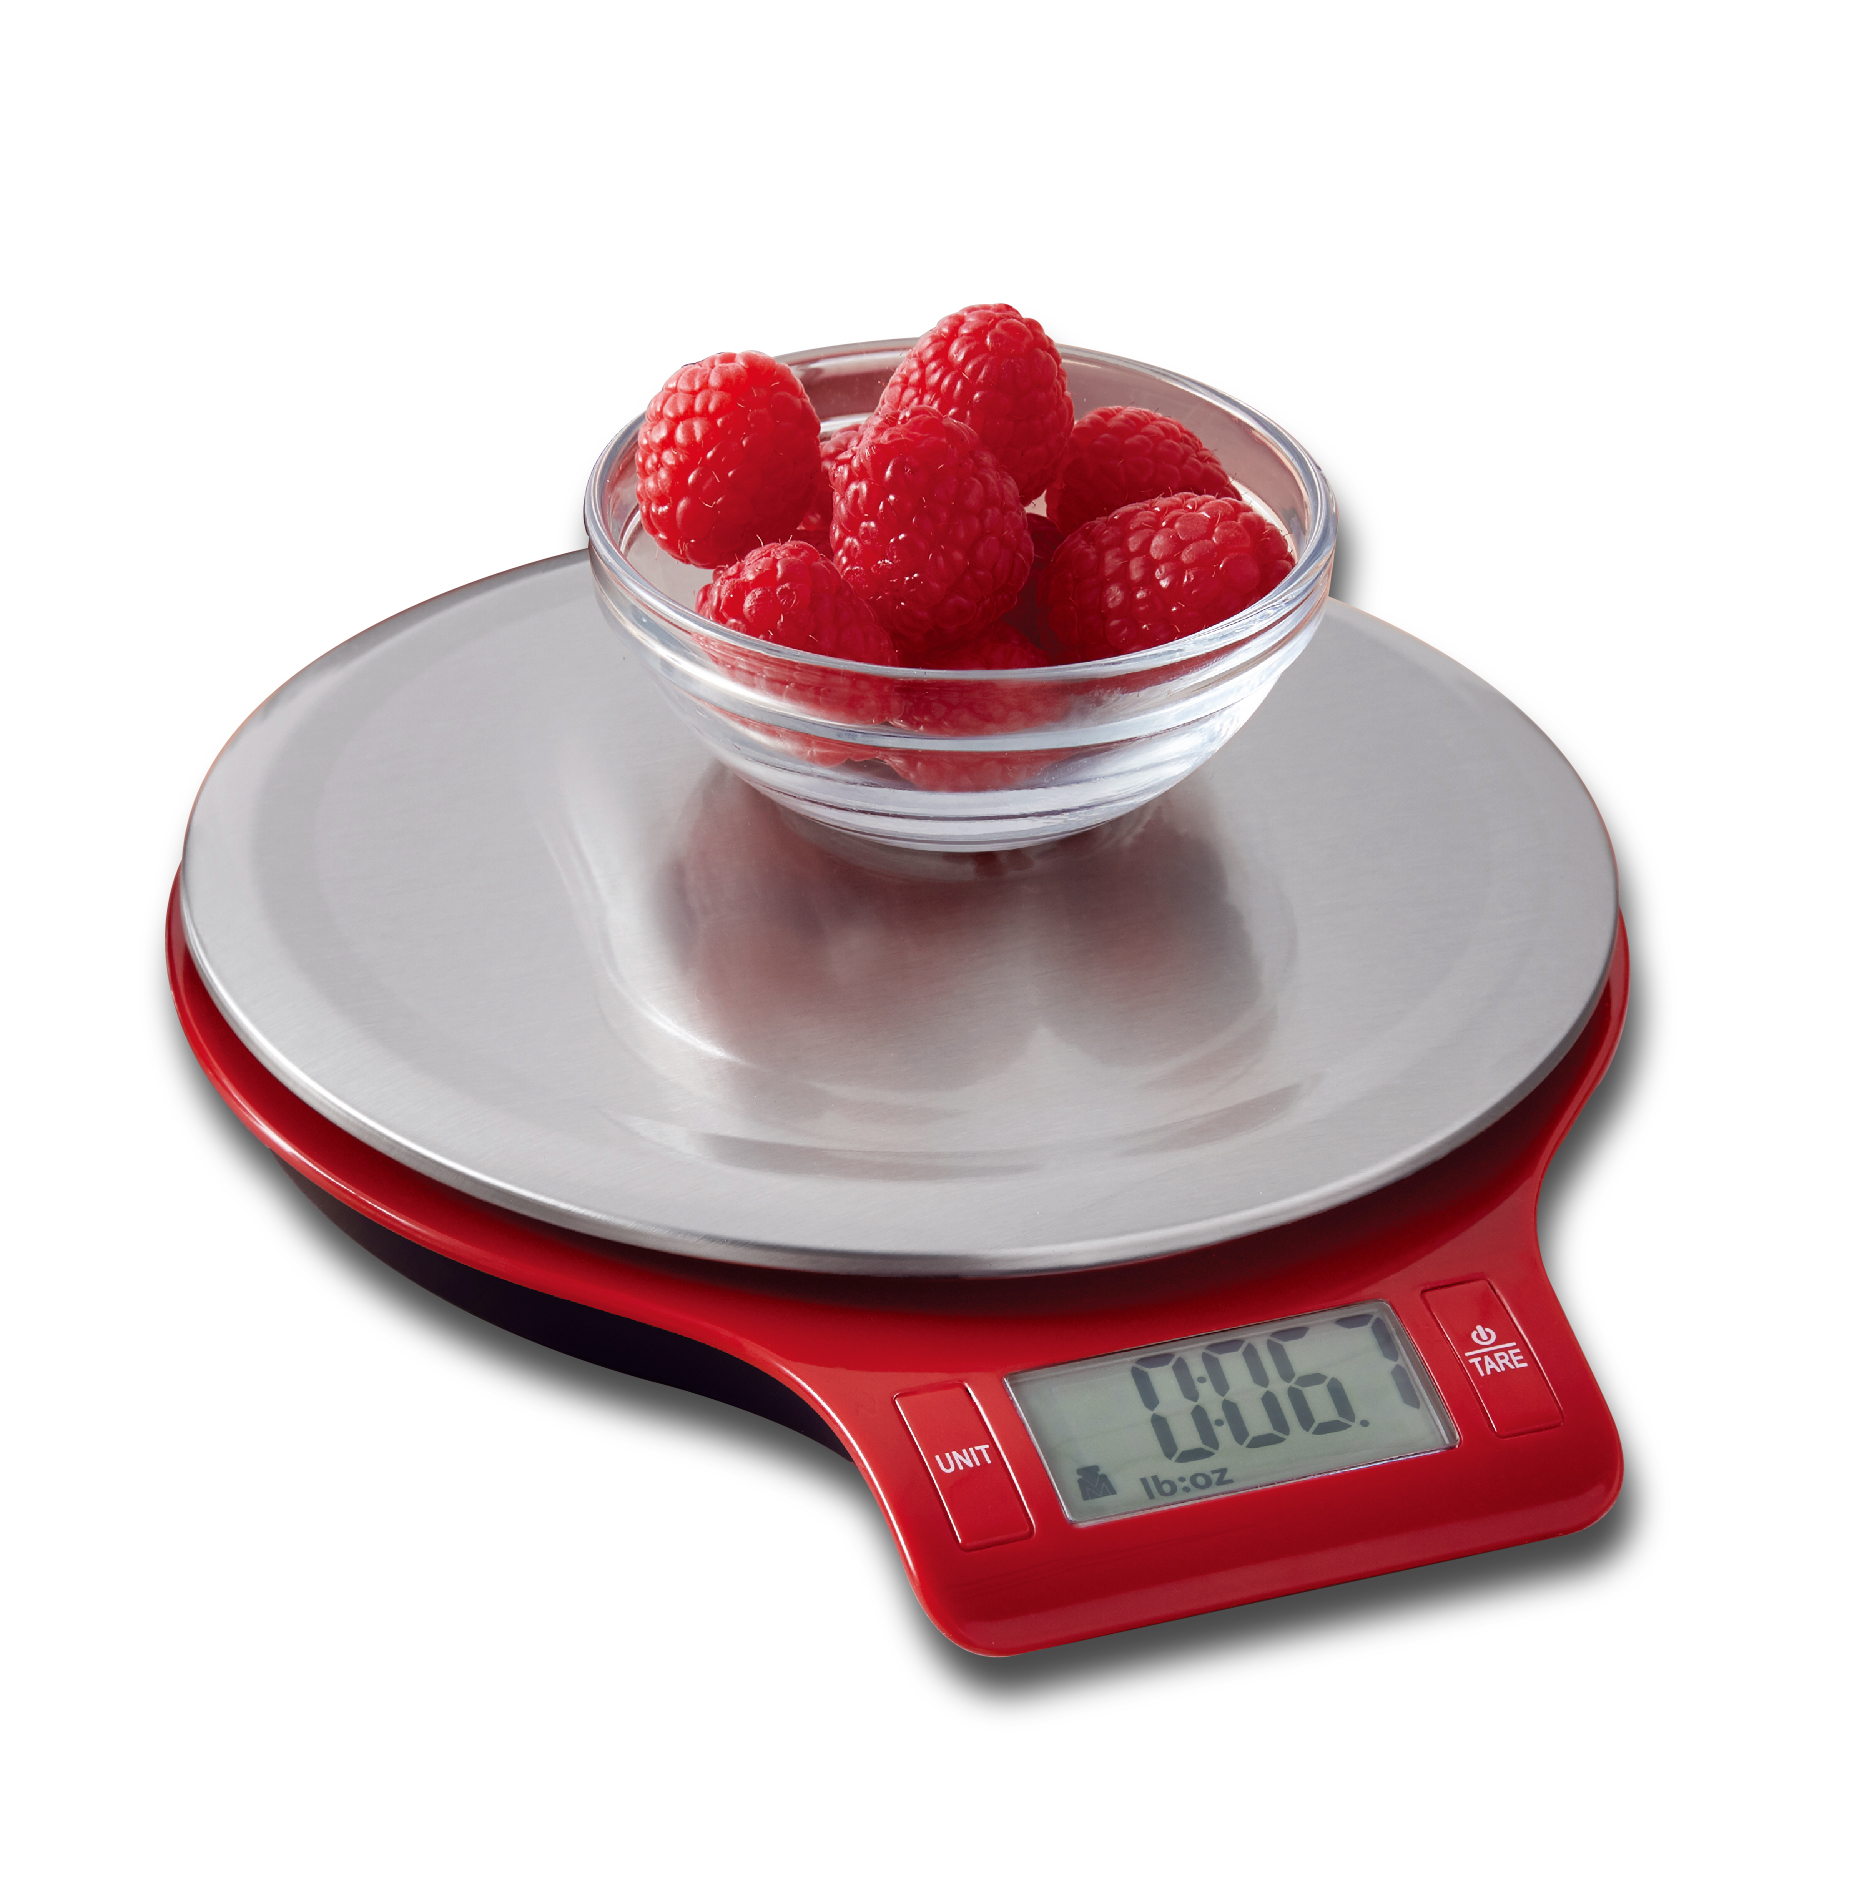 Mainstays Round Stainless Steel Digital Kitchen Scale, Red - image 1 of 11